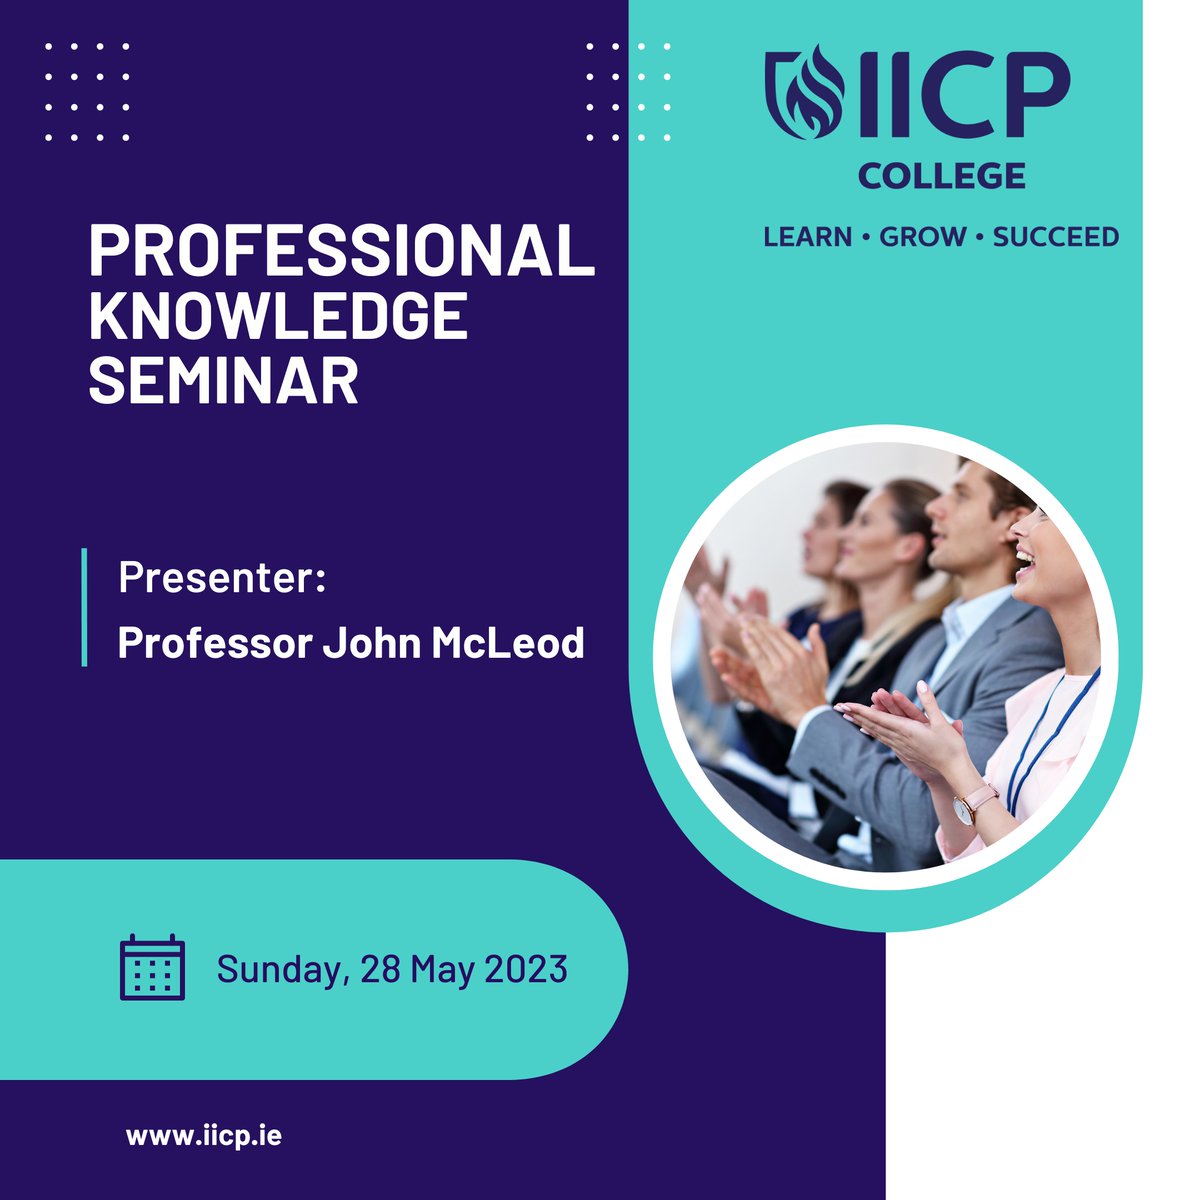 Today IICP College will present the Professional Knowledge Seminar in the Royal Marine Hotel. We are incredibly fortunate to have Professor John McLeod lecturing today. Best wishes to all of our attendees, we hope you all enjoy the day.

#MSc  #Pluralism #pluralisticcounselling